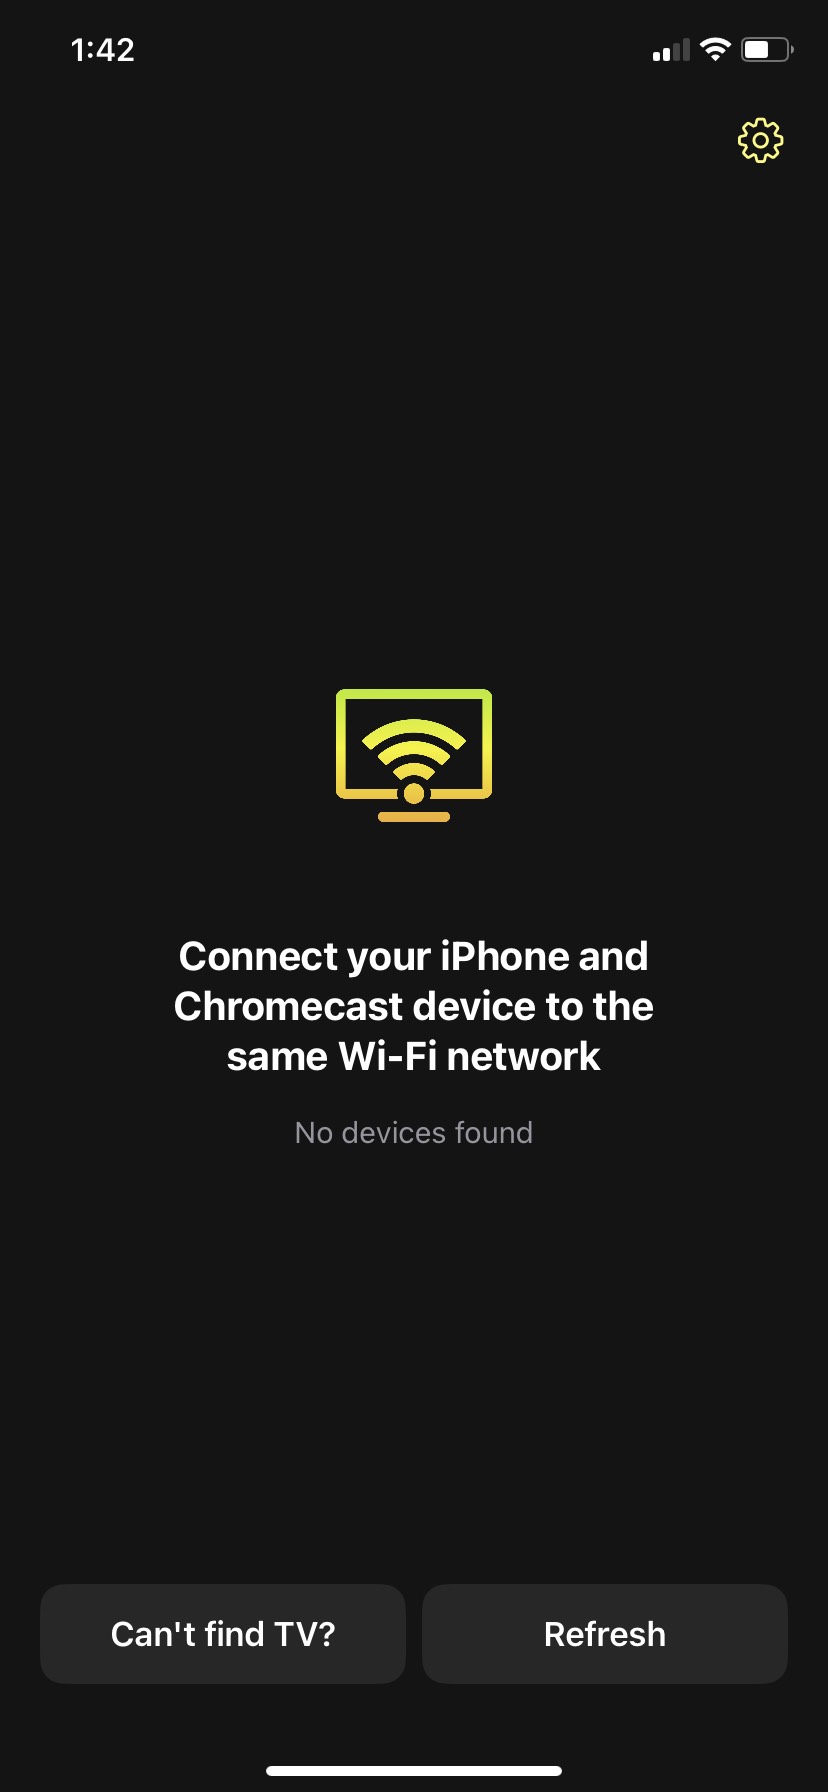 DoCast is searching nearby Chromecast devices